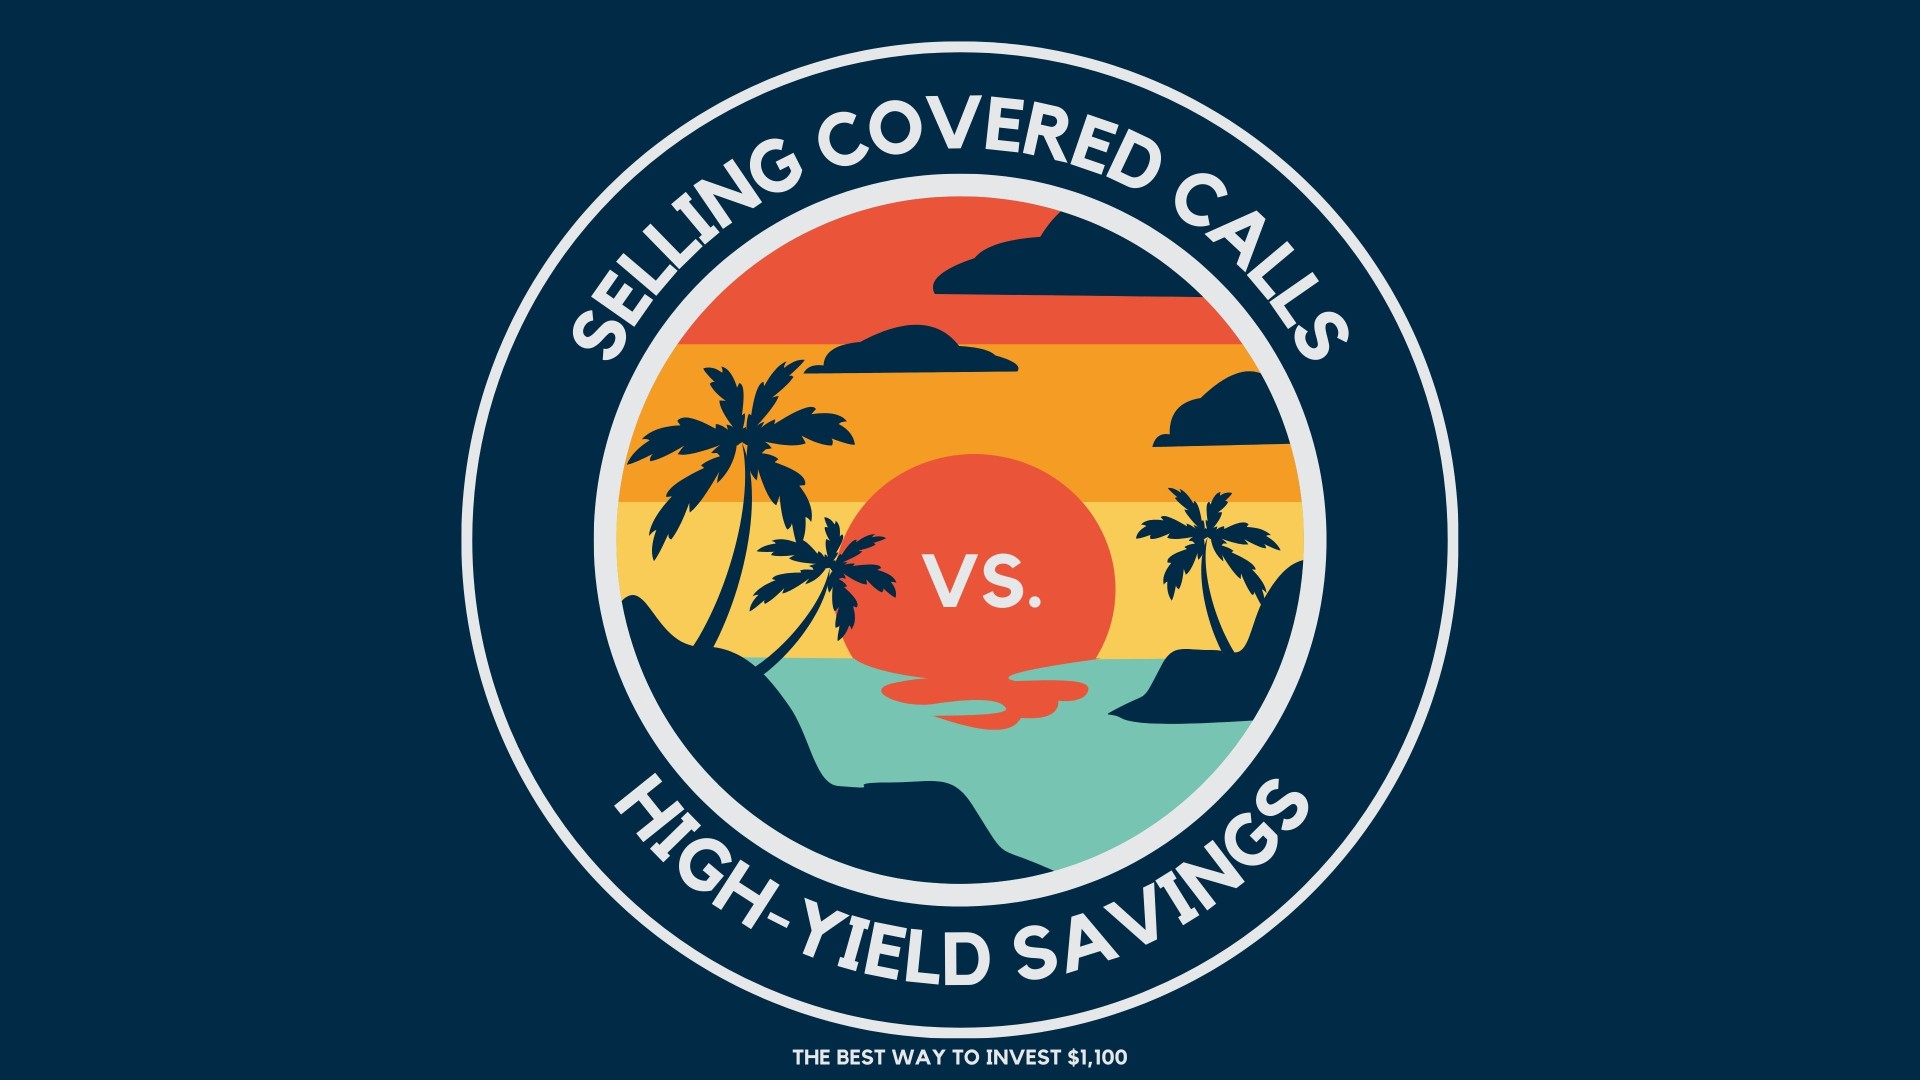 Selling Covered Calls vs. High Yield Savings: The Best Way to Invest $1,100